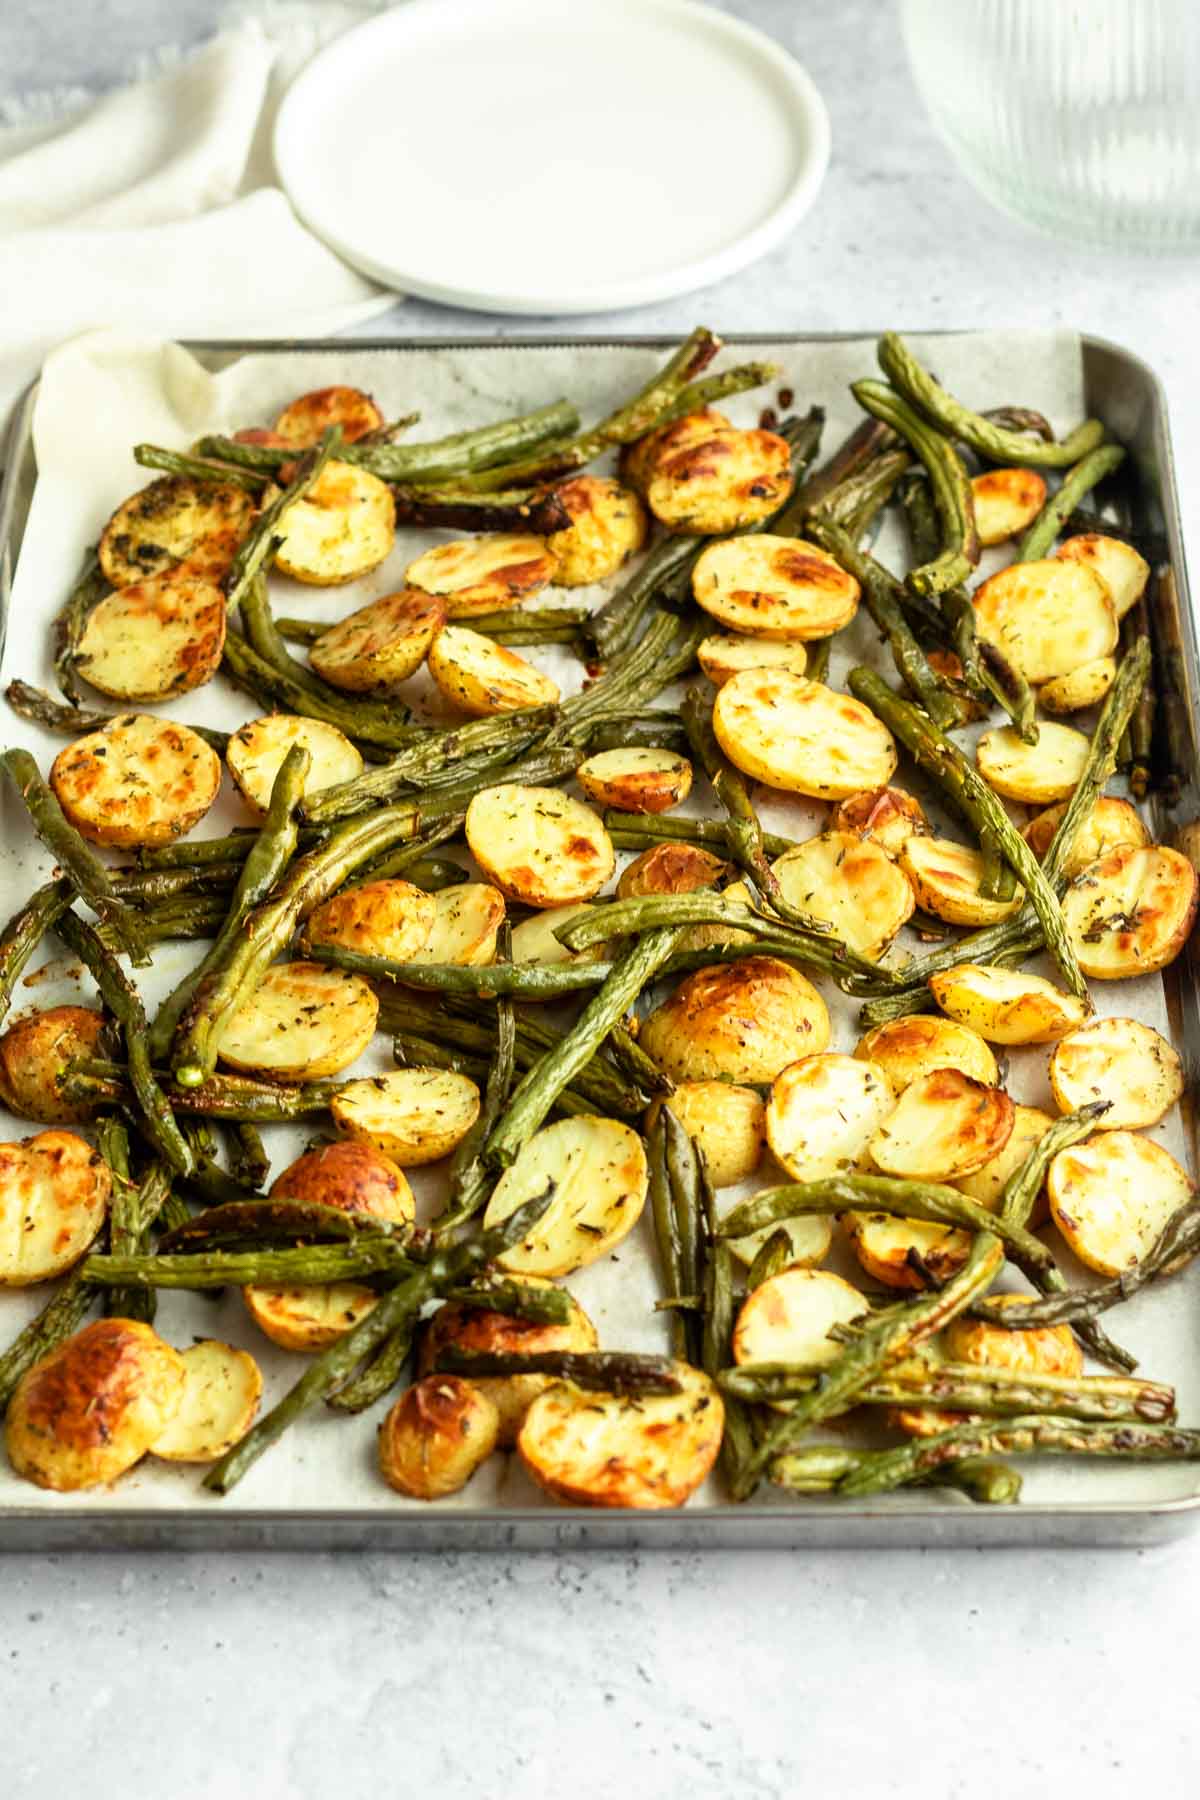 Sheet pan with green beans and potatoes.